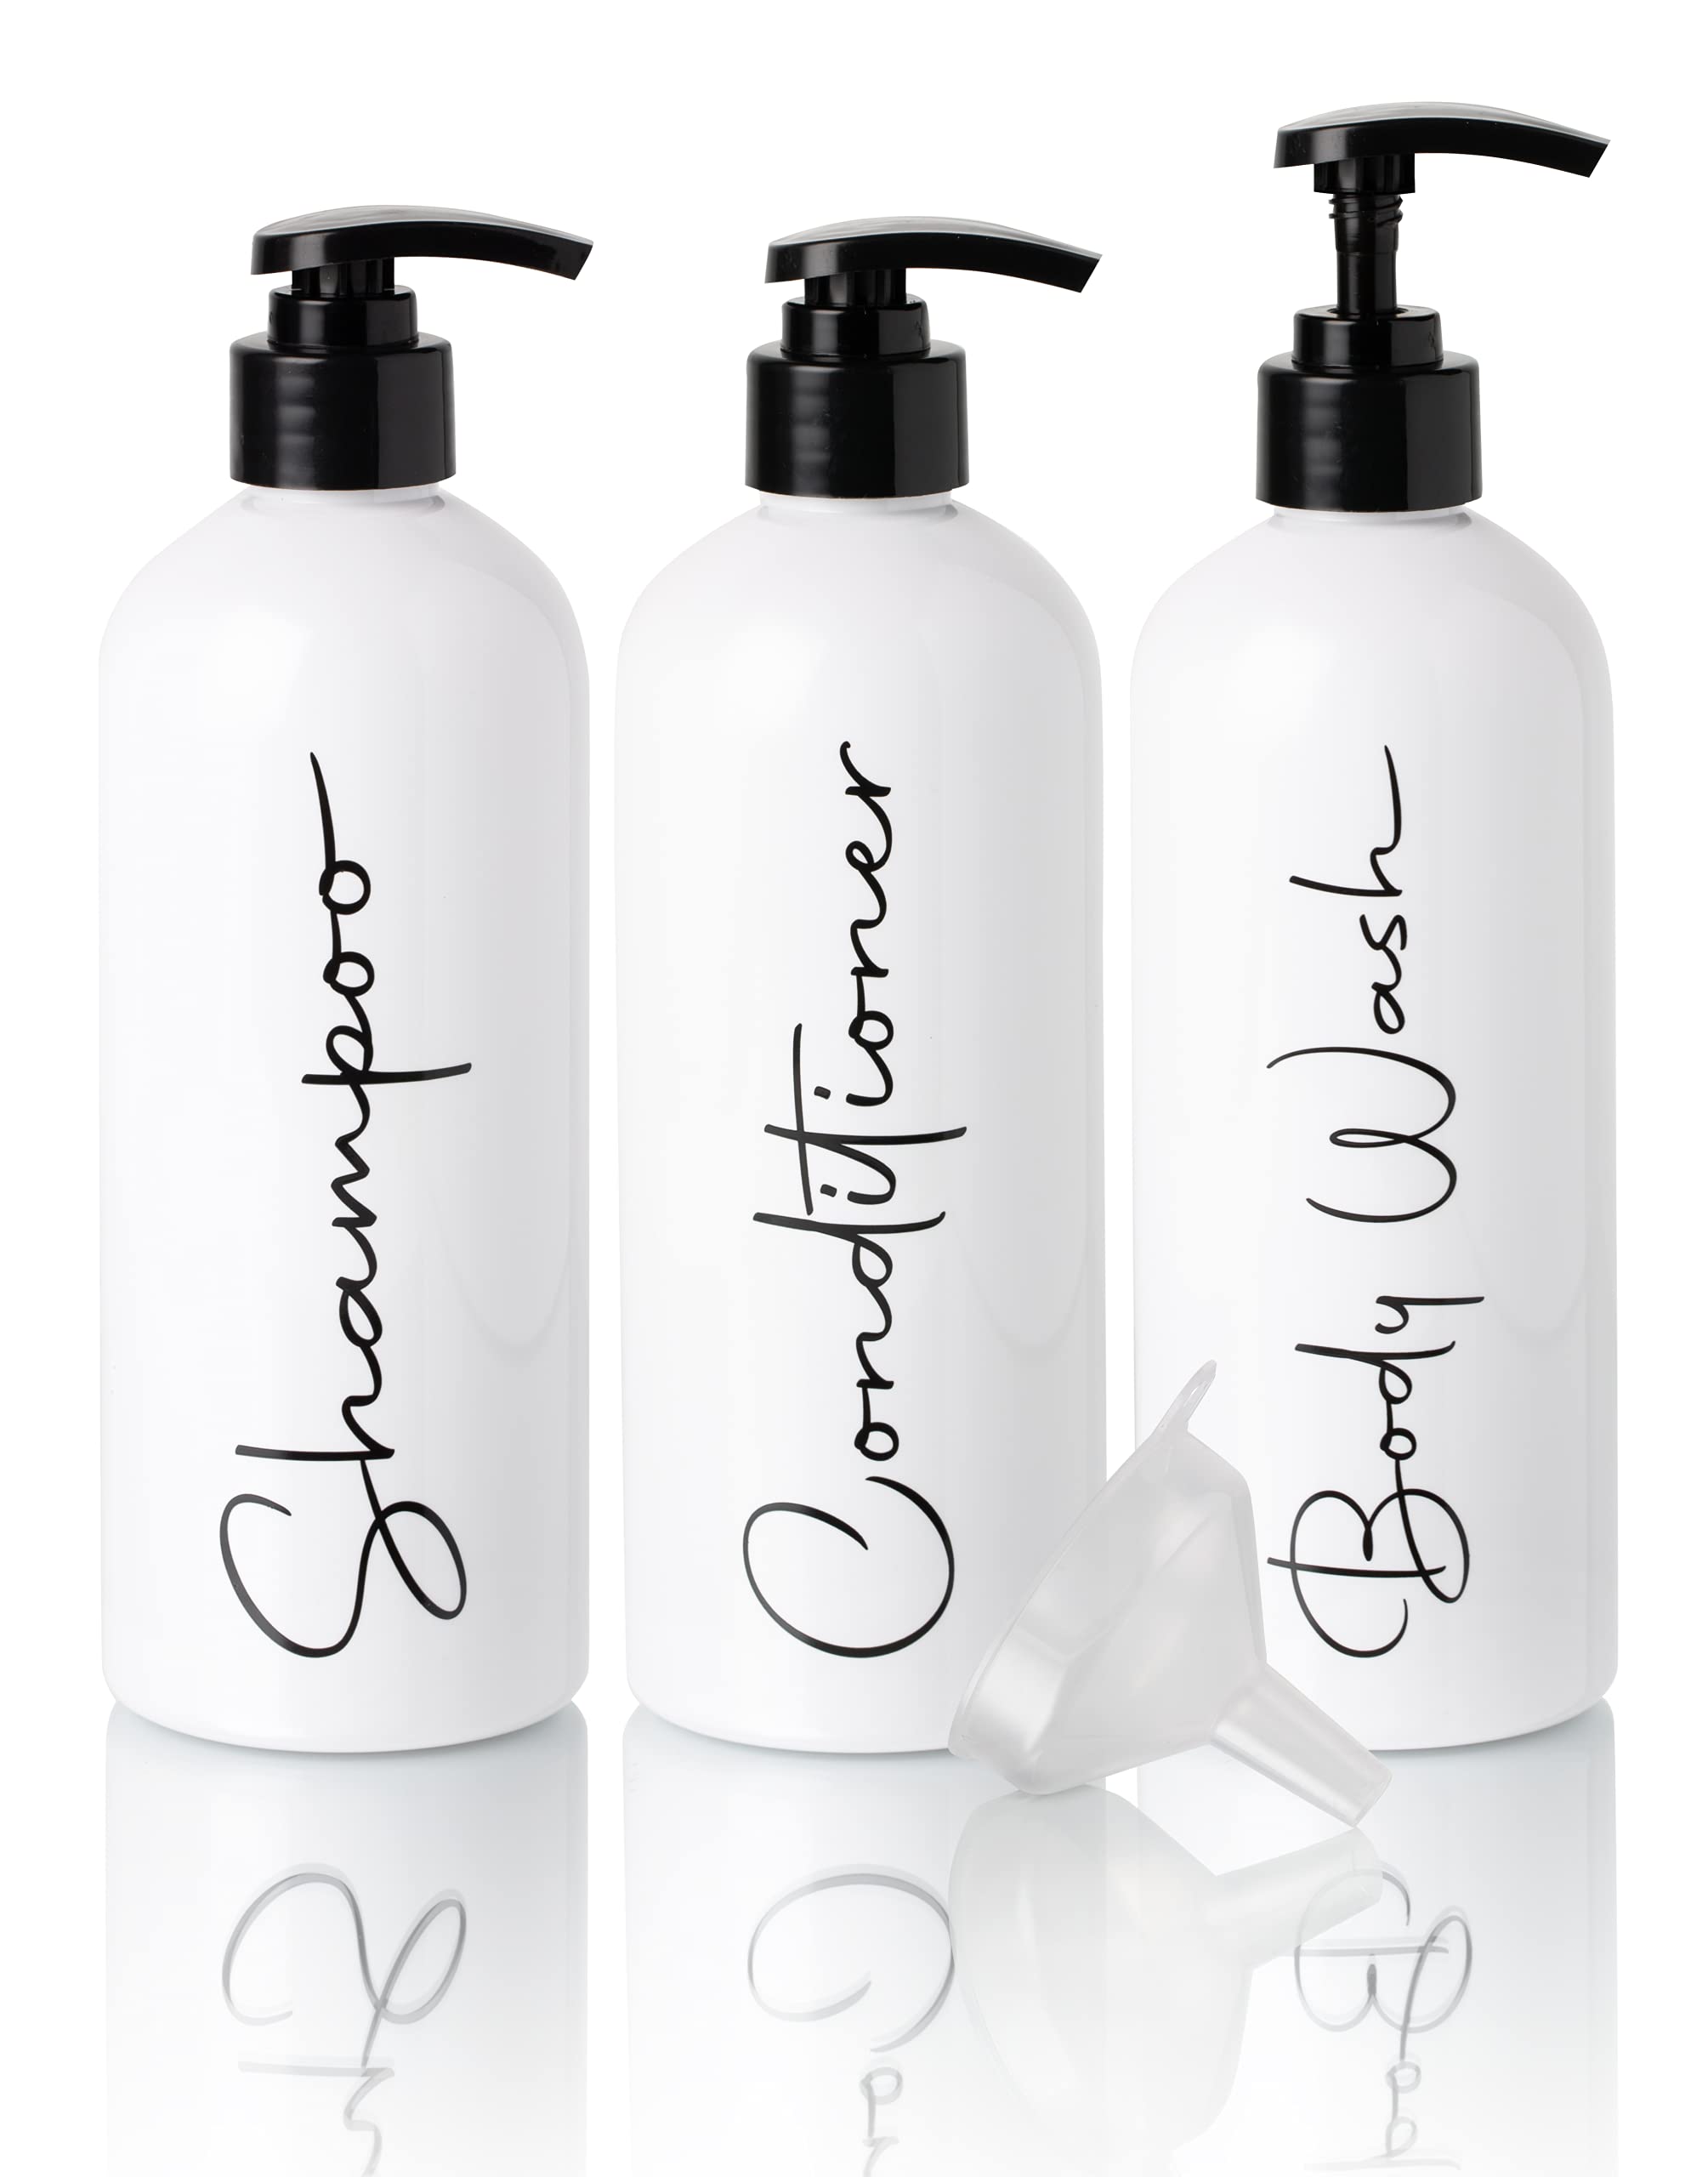 Alora 16oz Reusable Shampoo and Conditioner Bottles - Set of 3 - Easy to  Read Labels - Pump Bottle Dispenser for Shampoo, Conditioner, Body Wash -  Empty Plastic Refillable Containers for Shower Set of 3 (16oz) White